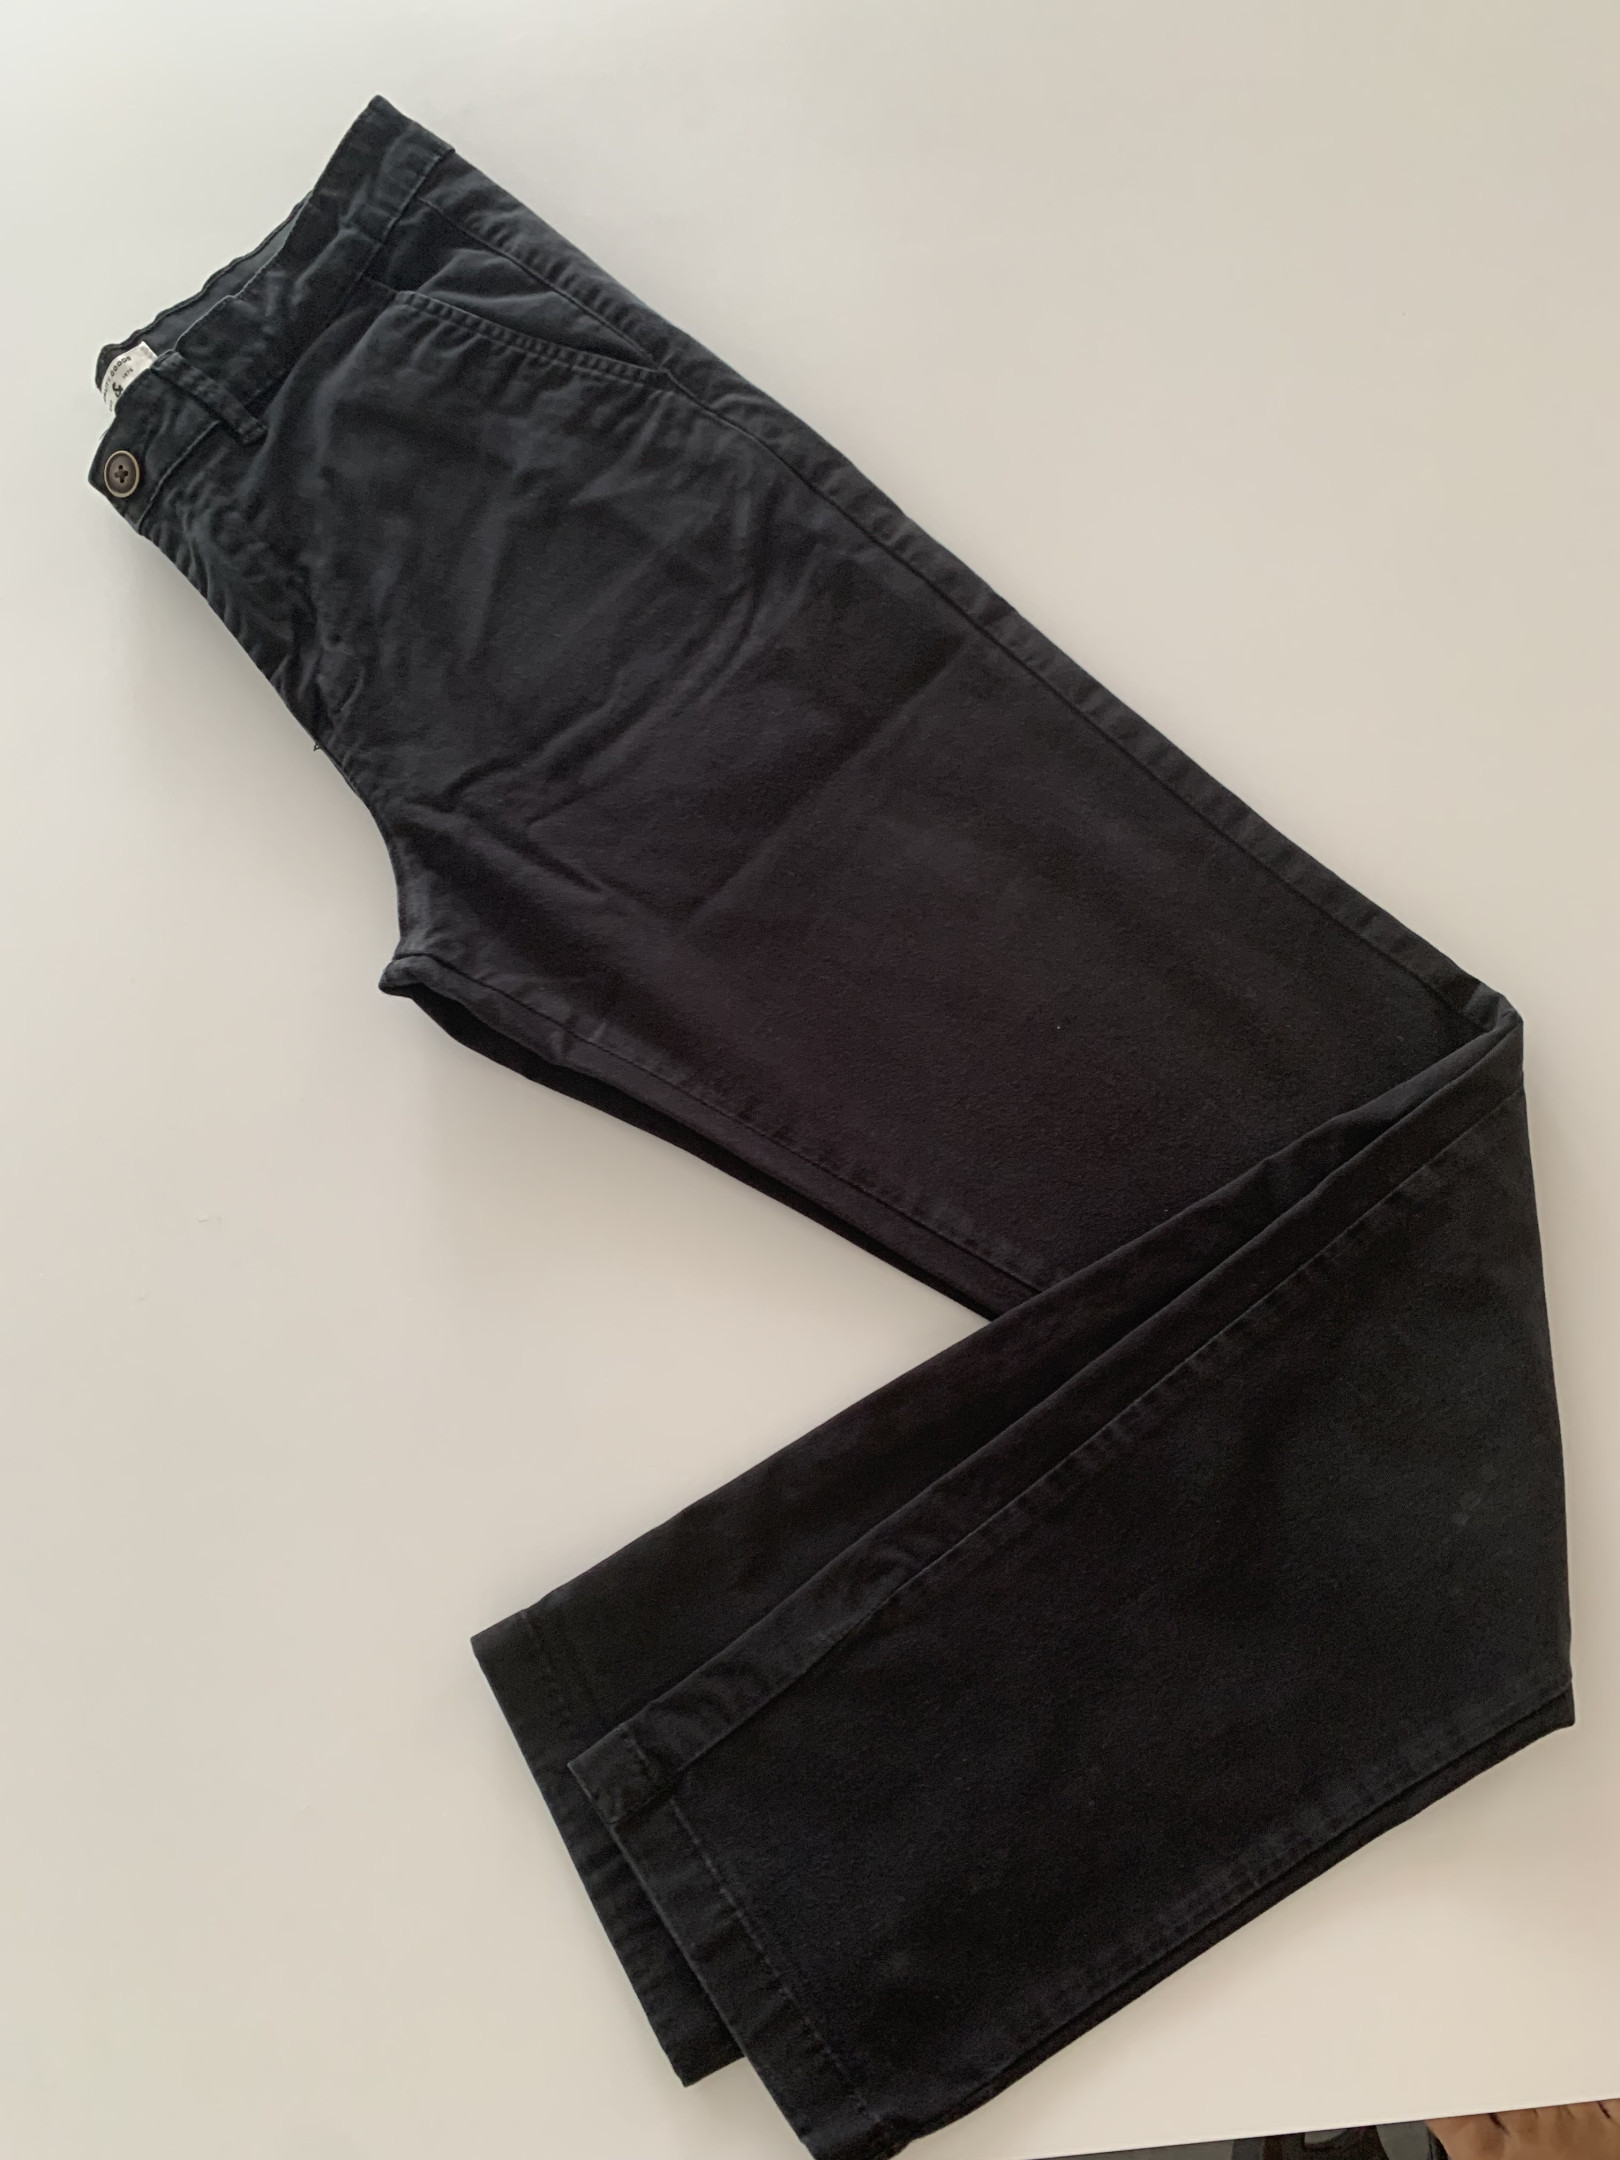 Jack and jones brief trousers